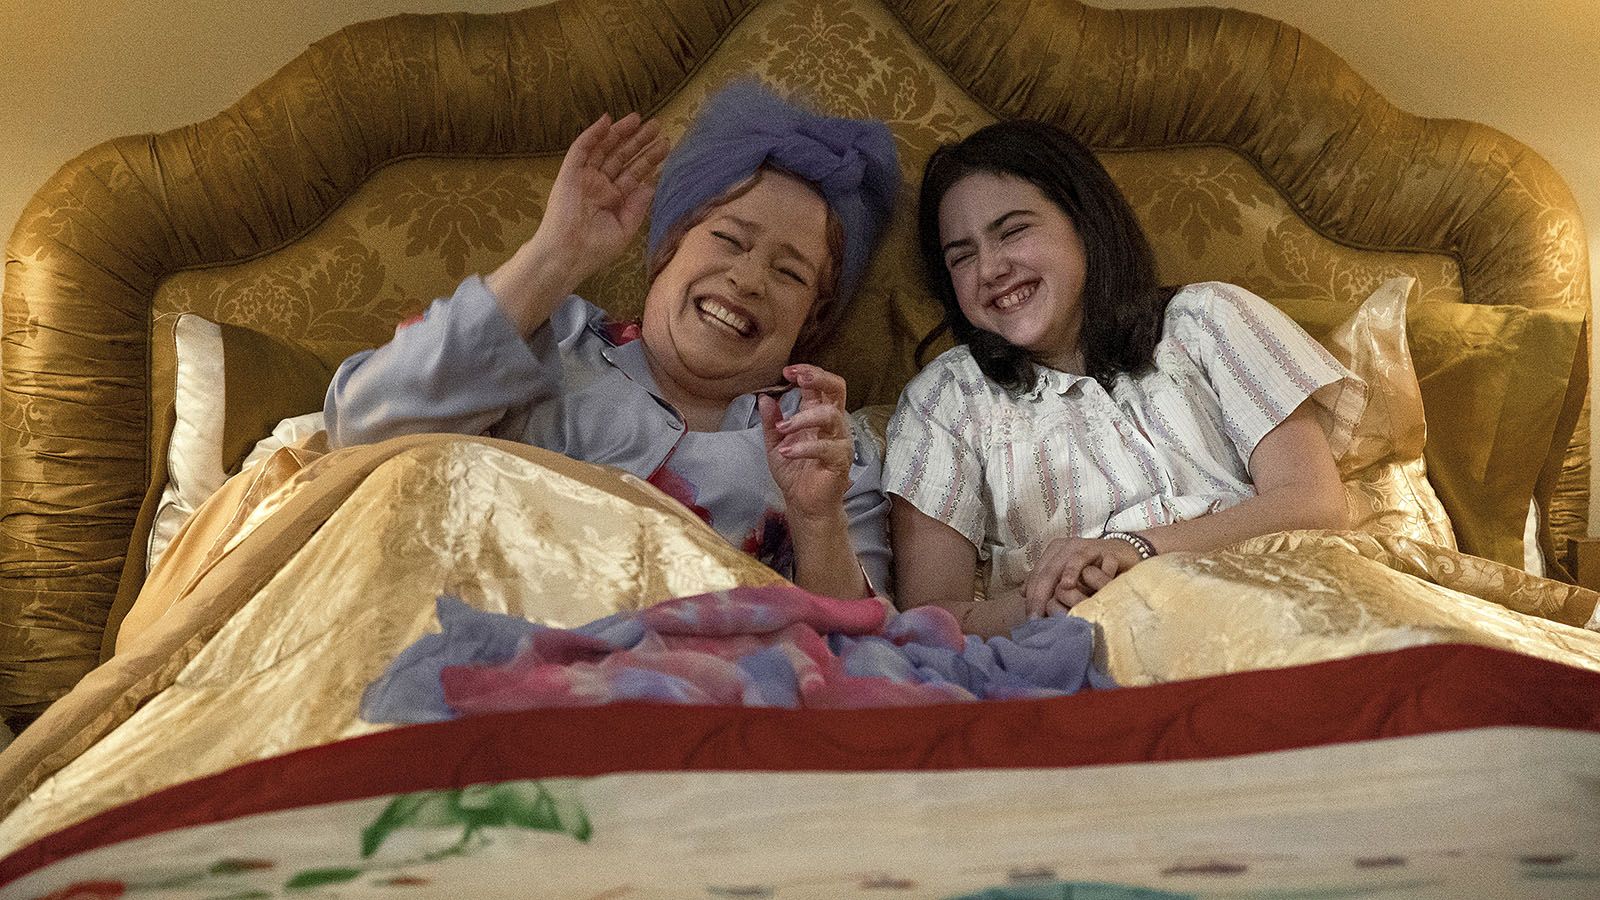 Kathy Bates and Abby Ryder Fortson star in Are You There God? It’s Me, Margaret.